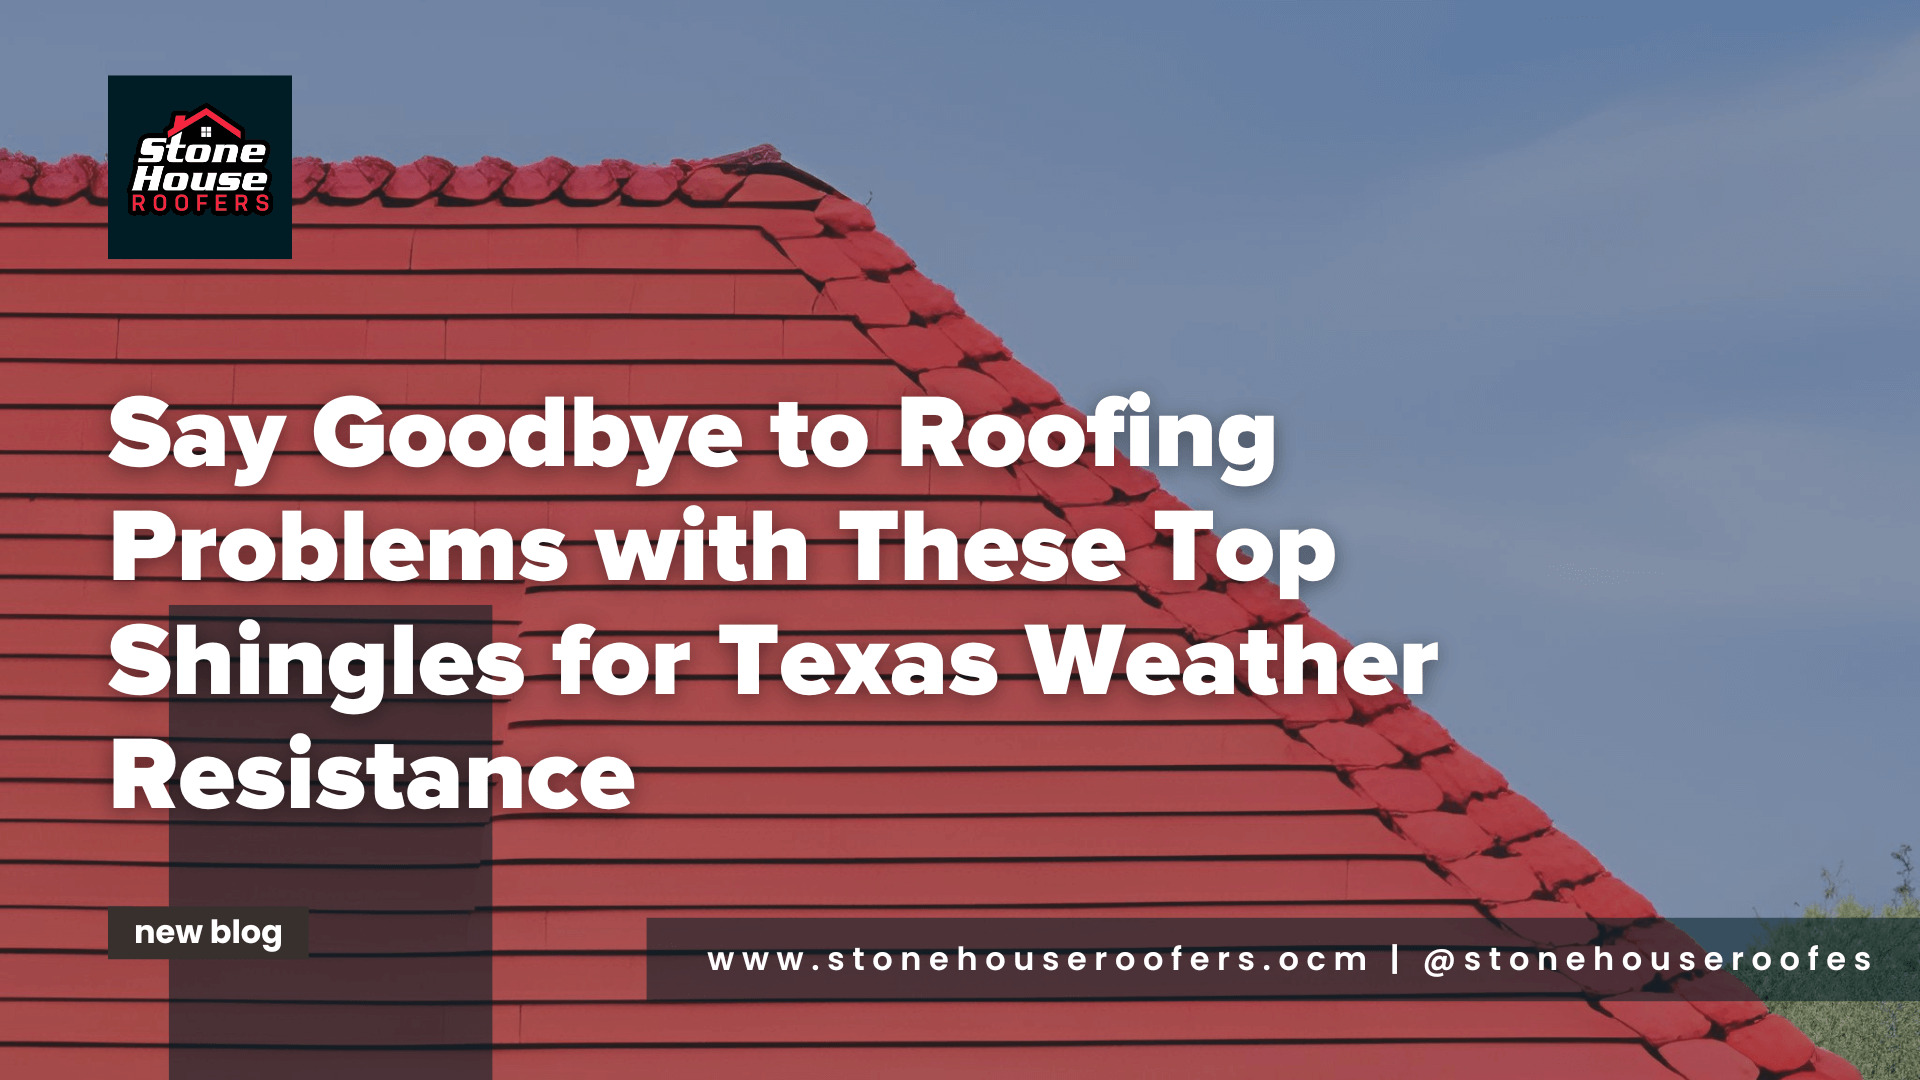 Say Goodbye to Roofing Problems with These Top Shingles for Texas Weather Resistance